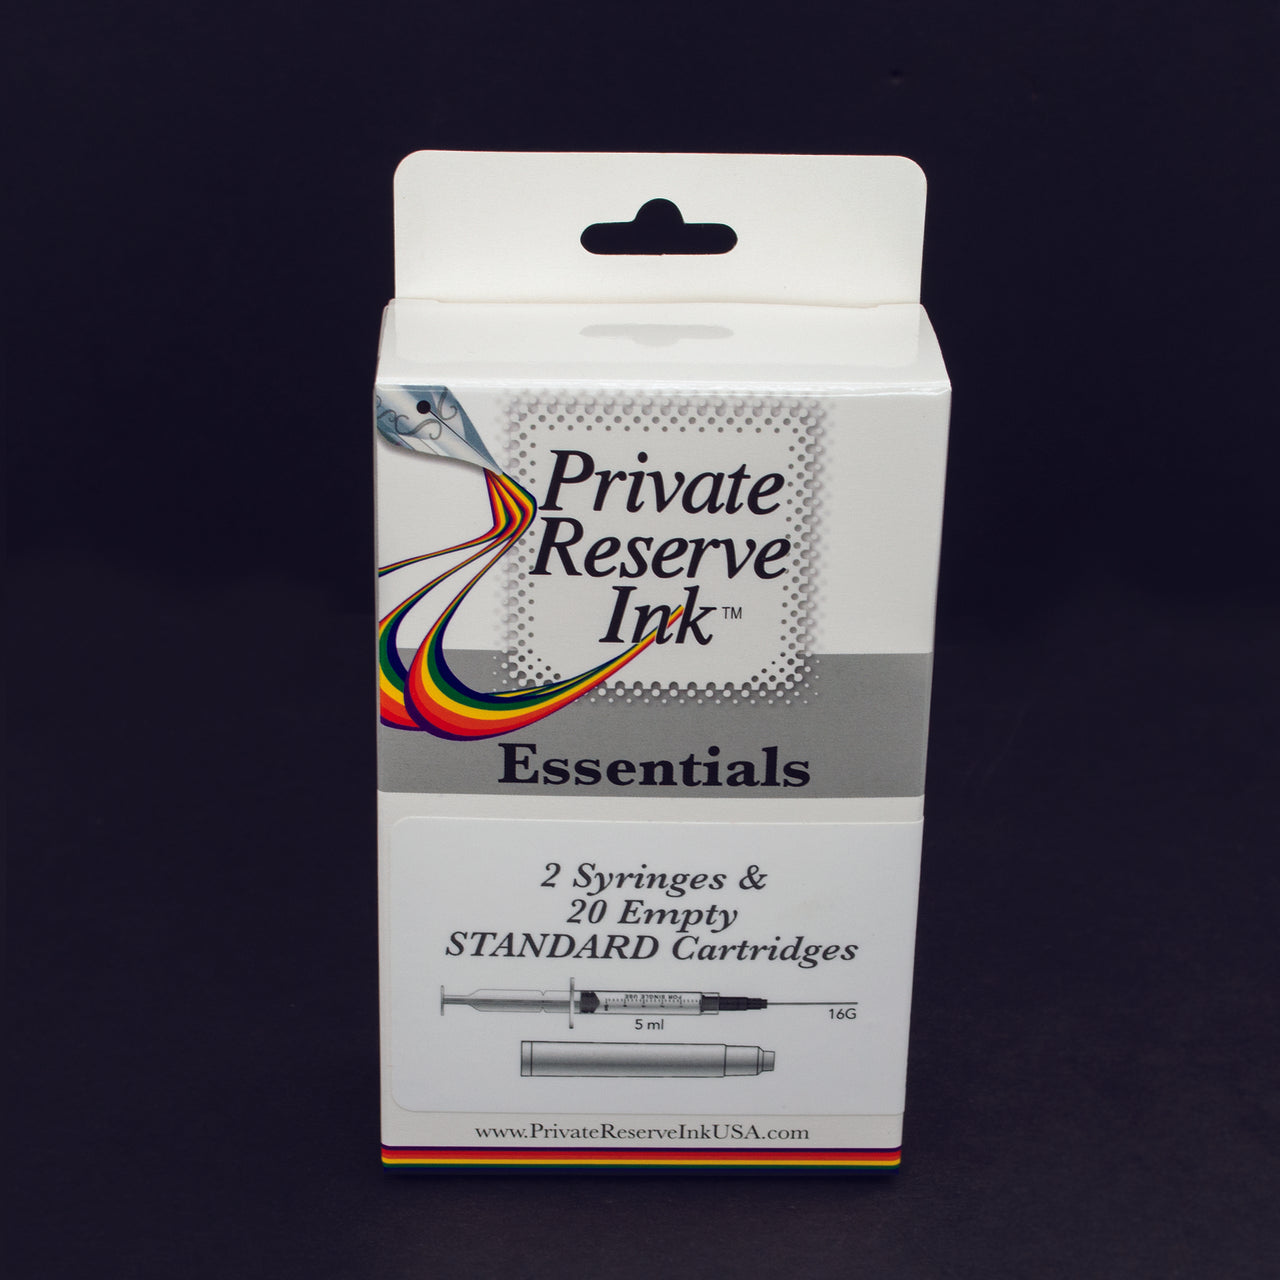 Private Reserve Ink Essentials Cartridge Refilling Kit